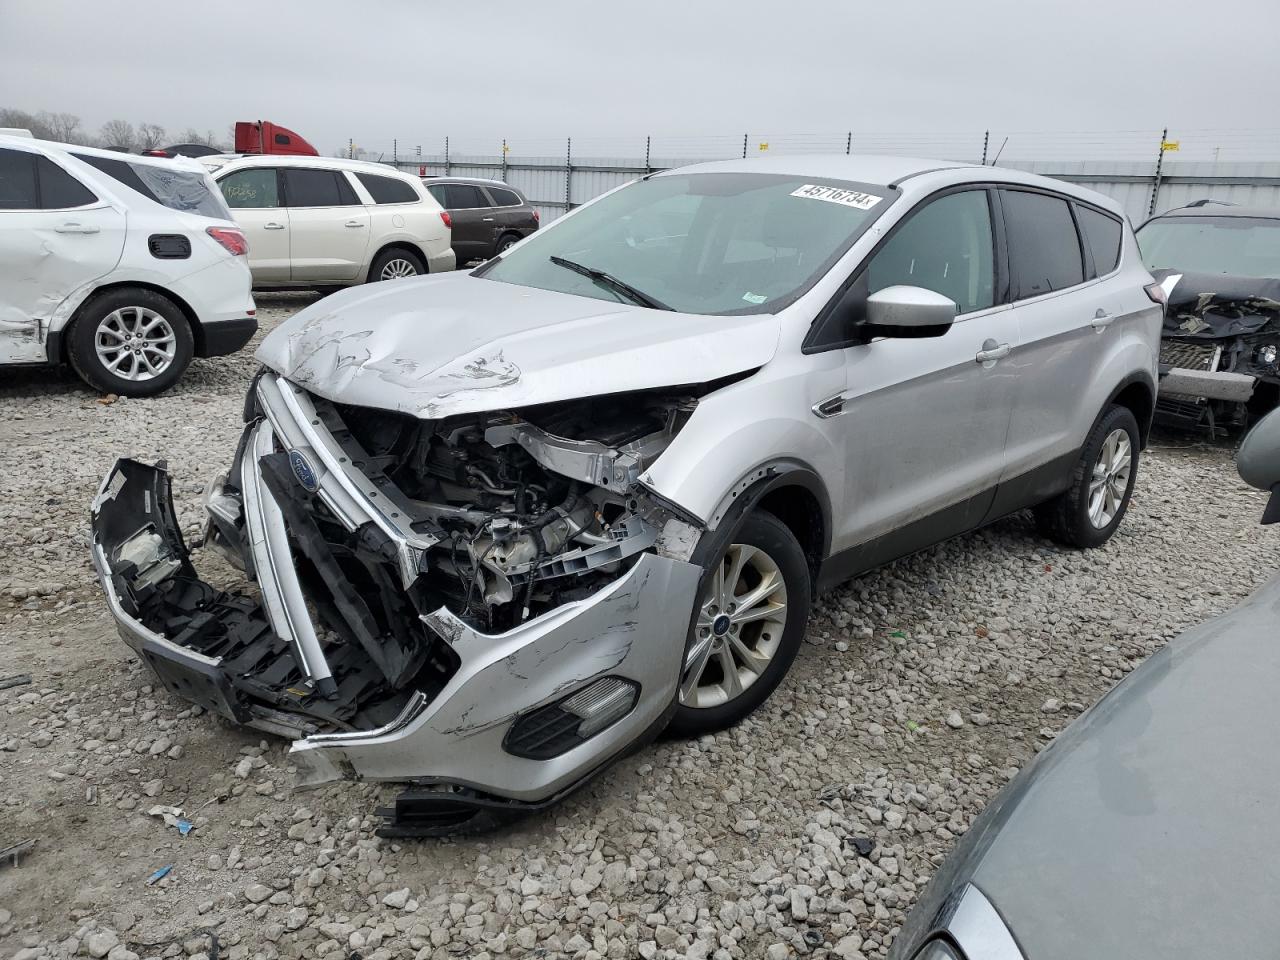 vin: 1FMCU9GD0HUC46612 1FMCU9GD0HUC46612 2017 ford escape 1500 for Sale in 62205 1001, Il - Southern Illinois, Cahokia Heights, USA